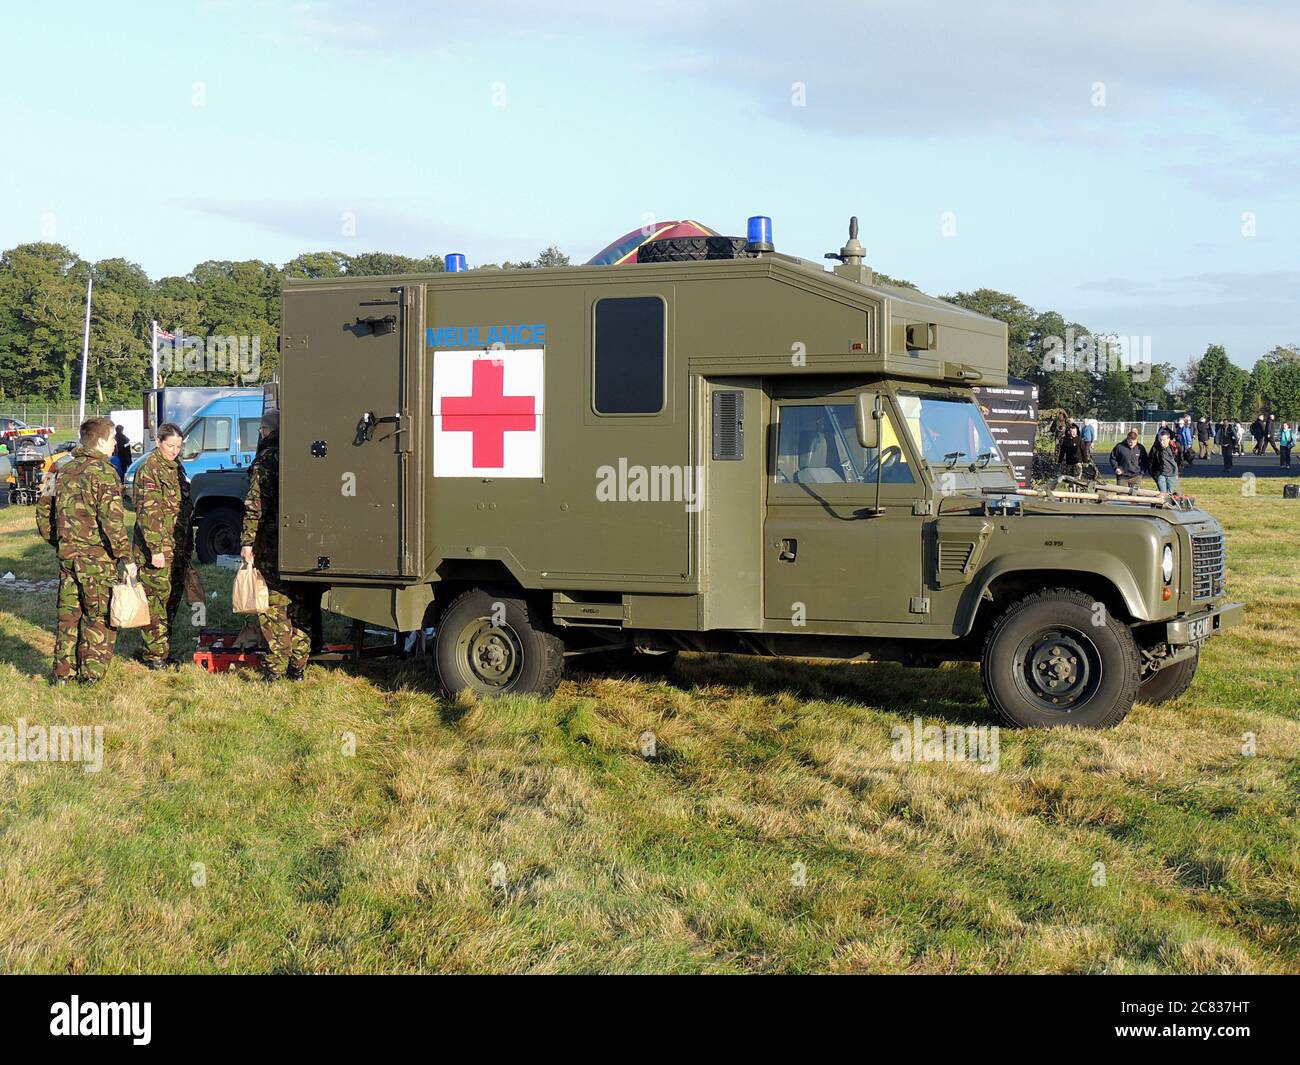 A Land Rover 130 Pulse ambulance  operated by the British Army, on display at the RAF Leuchars Airshow in 2012. Stock Photo